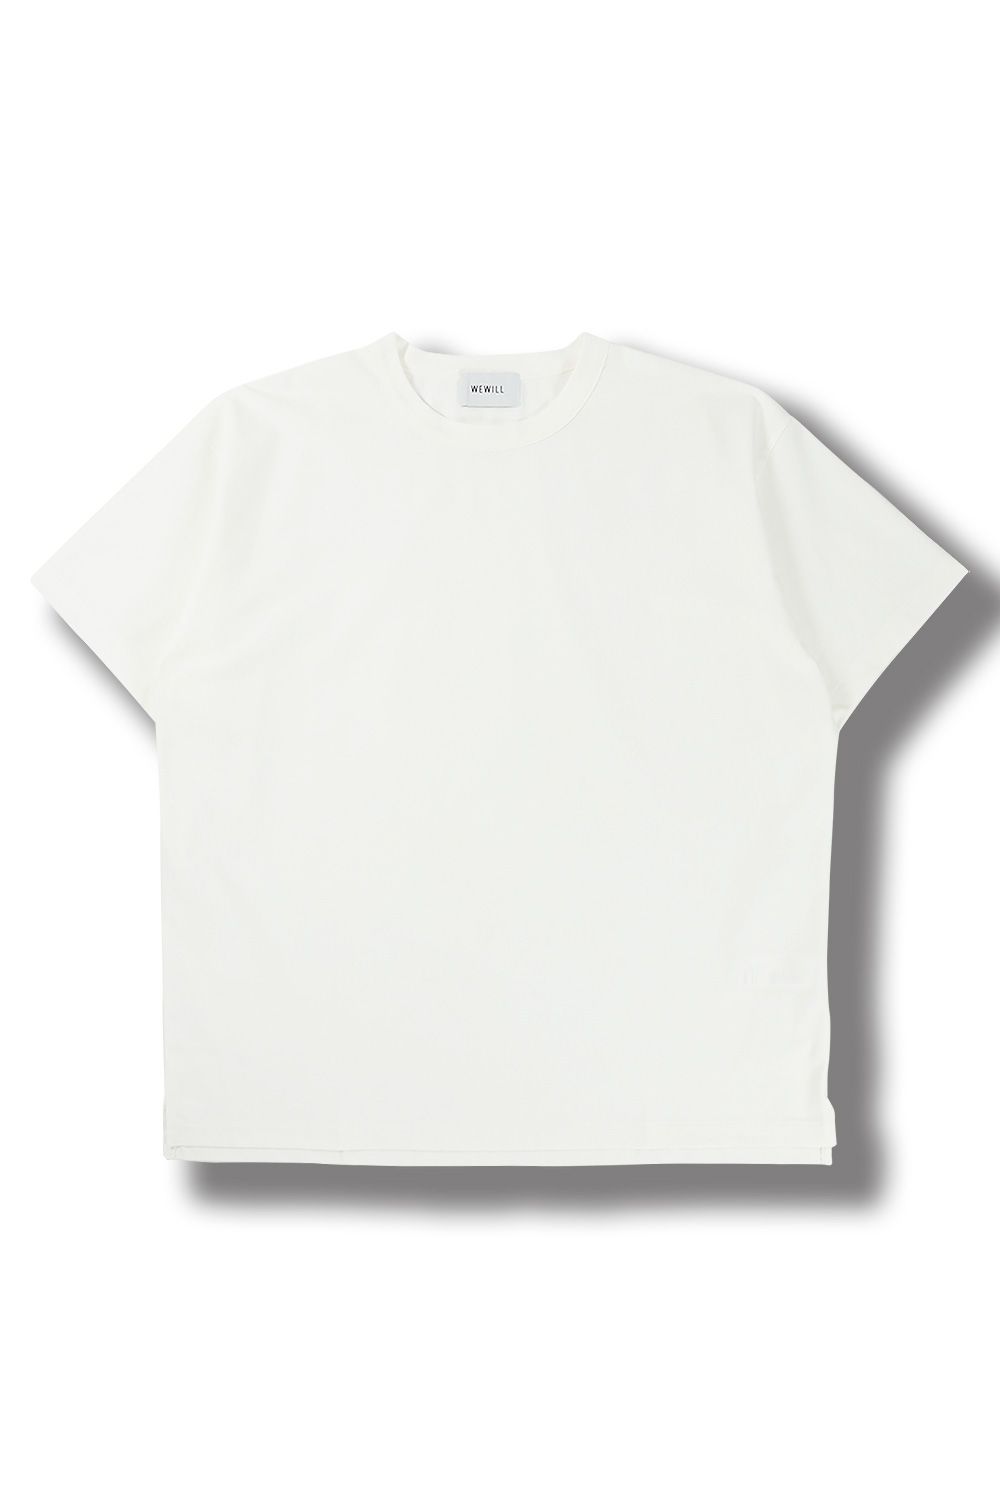 WEWILL ウィーウイル (W-000-8011) TRICOT Tシャツ 4